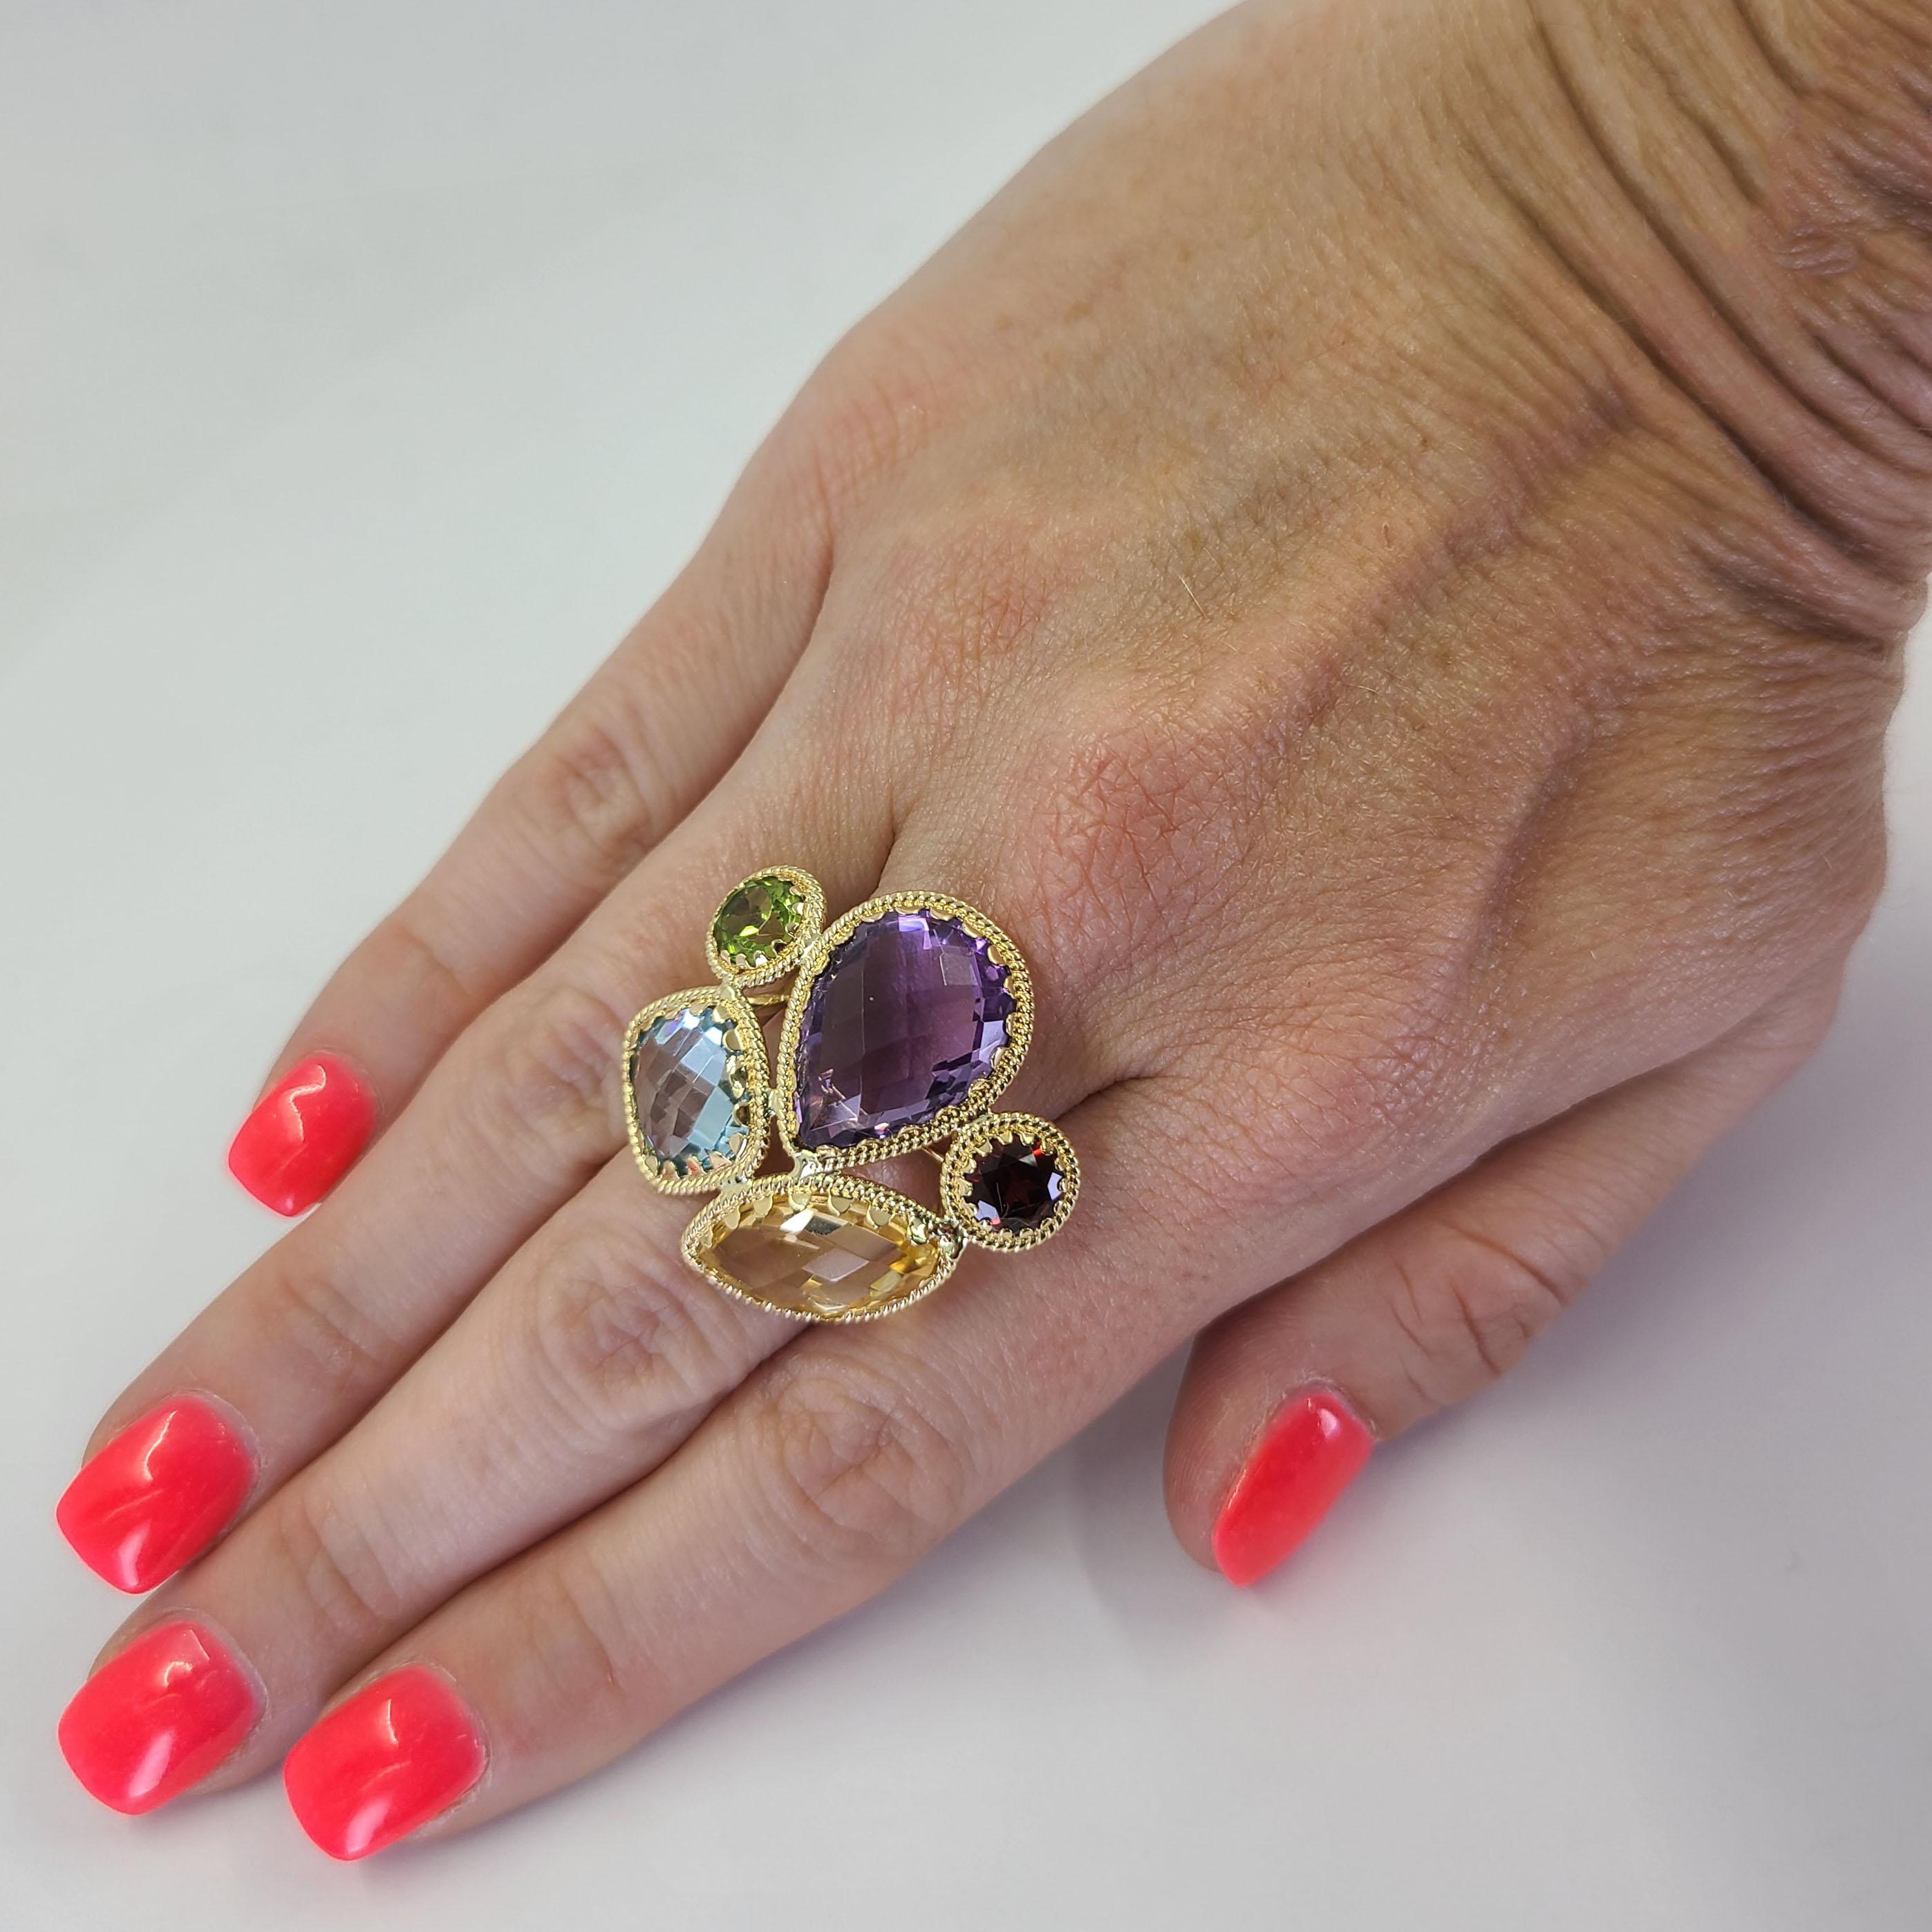 18 Karat Yellow Gold Multicolor Cocktail Ring Featuring A Pear Cut Amethyst, Marquise Cut Citrine, Cushion Cut Blue Topaz, Round Cut Garnet, and Round Cut Peridot. Finger Size 6.5; Purchase Includes One Sizing Service Prior to Shipment. Finished